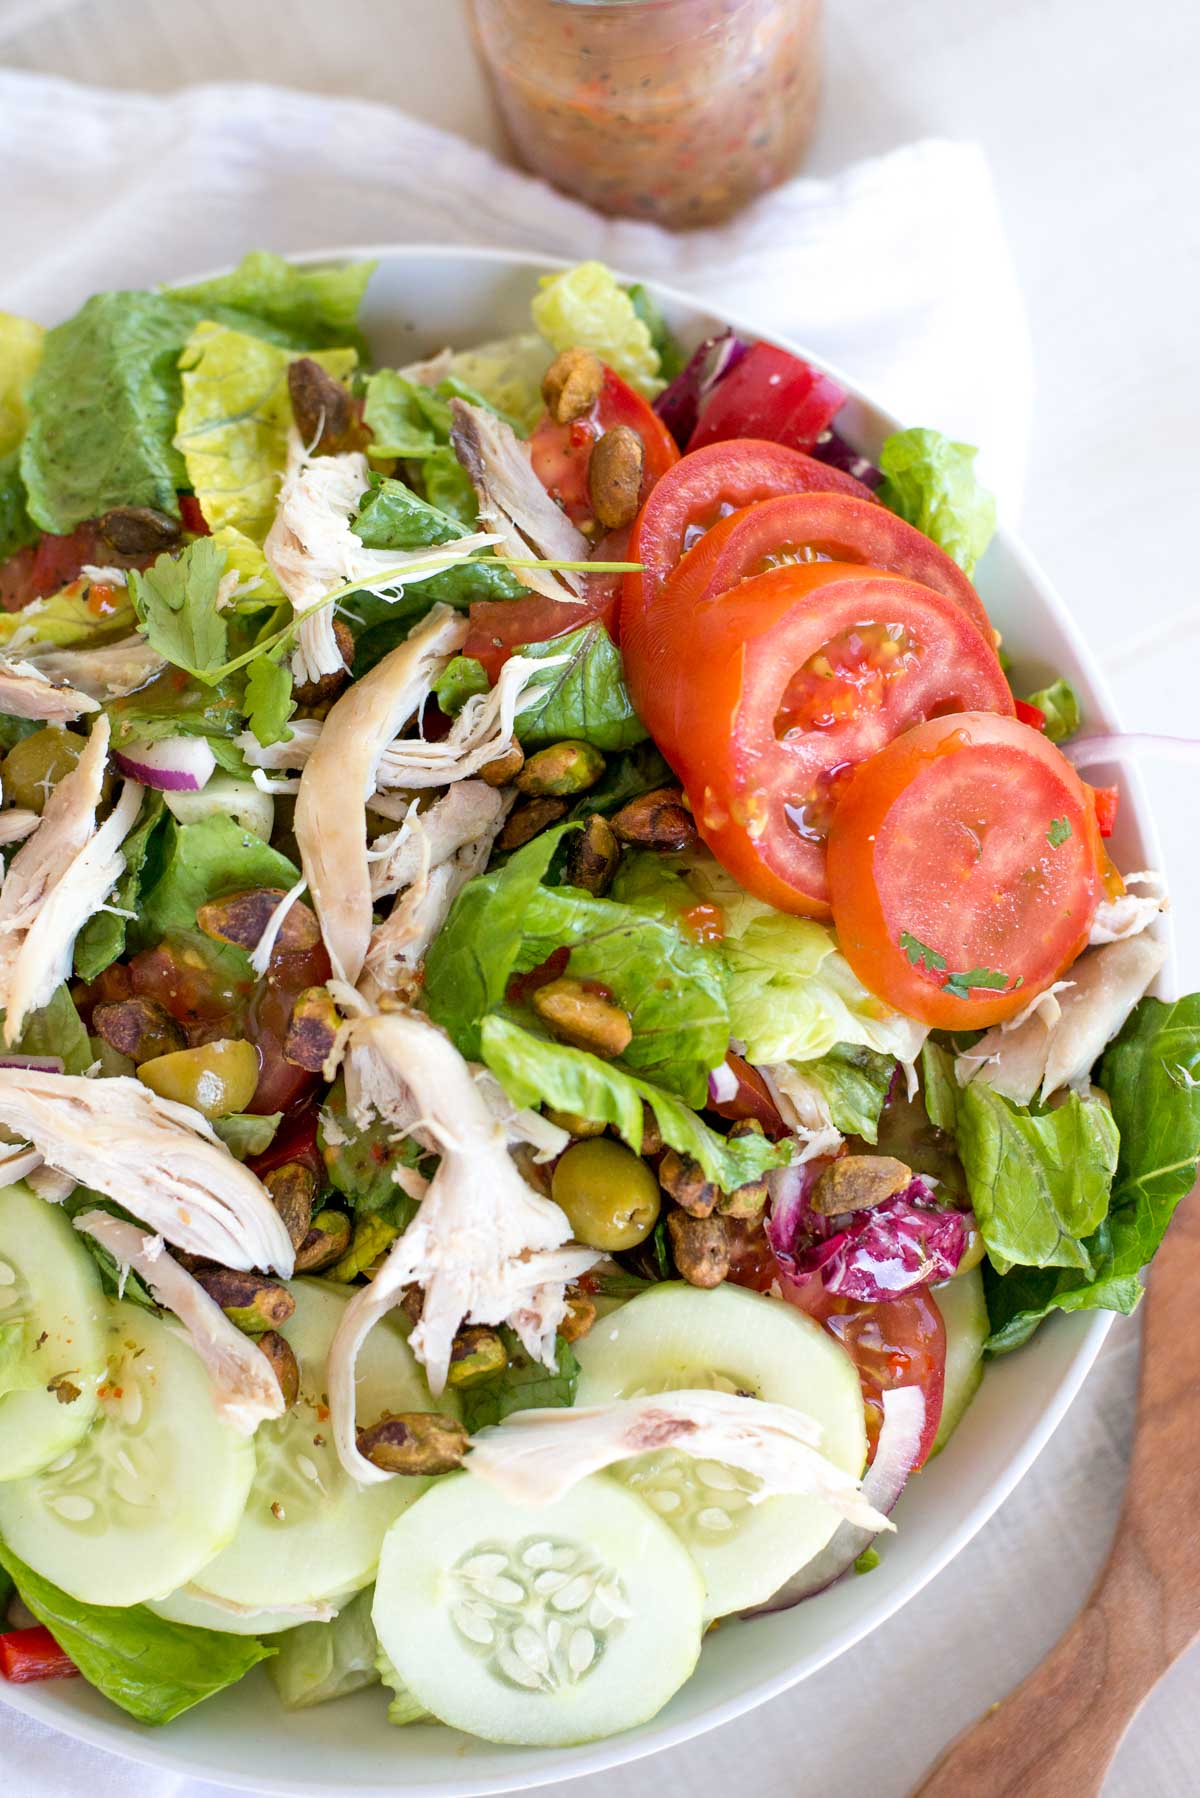 The most delicious salad you'll ever eat that takes 10 minutes to prep. Quick Italian Salad with Shredded Chicken